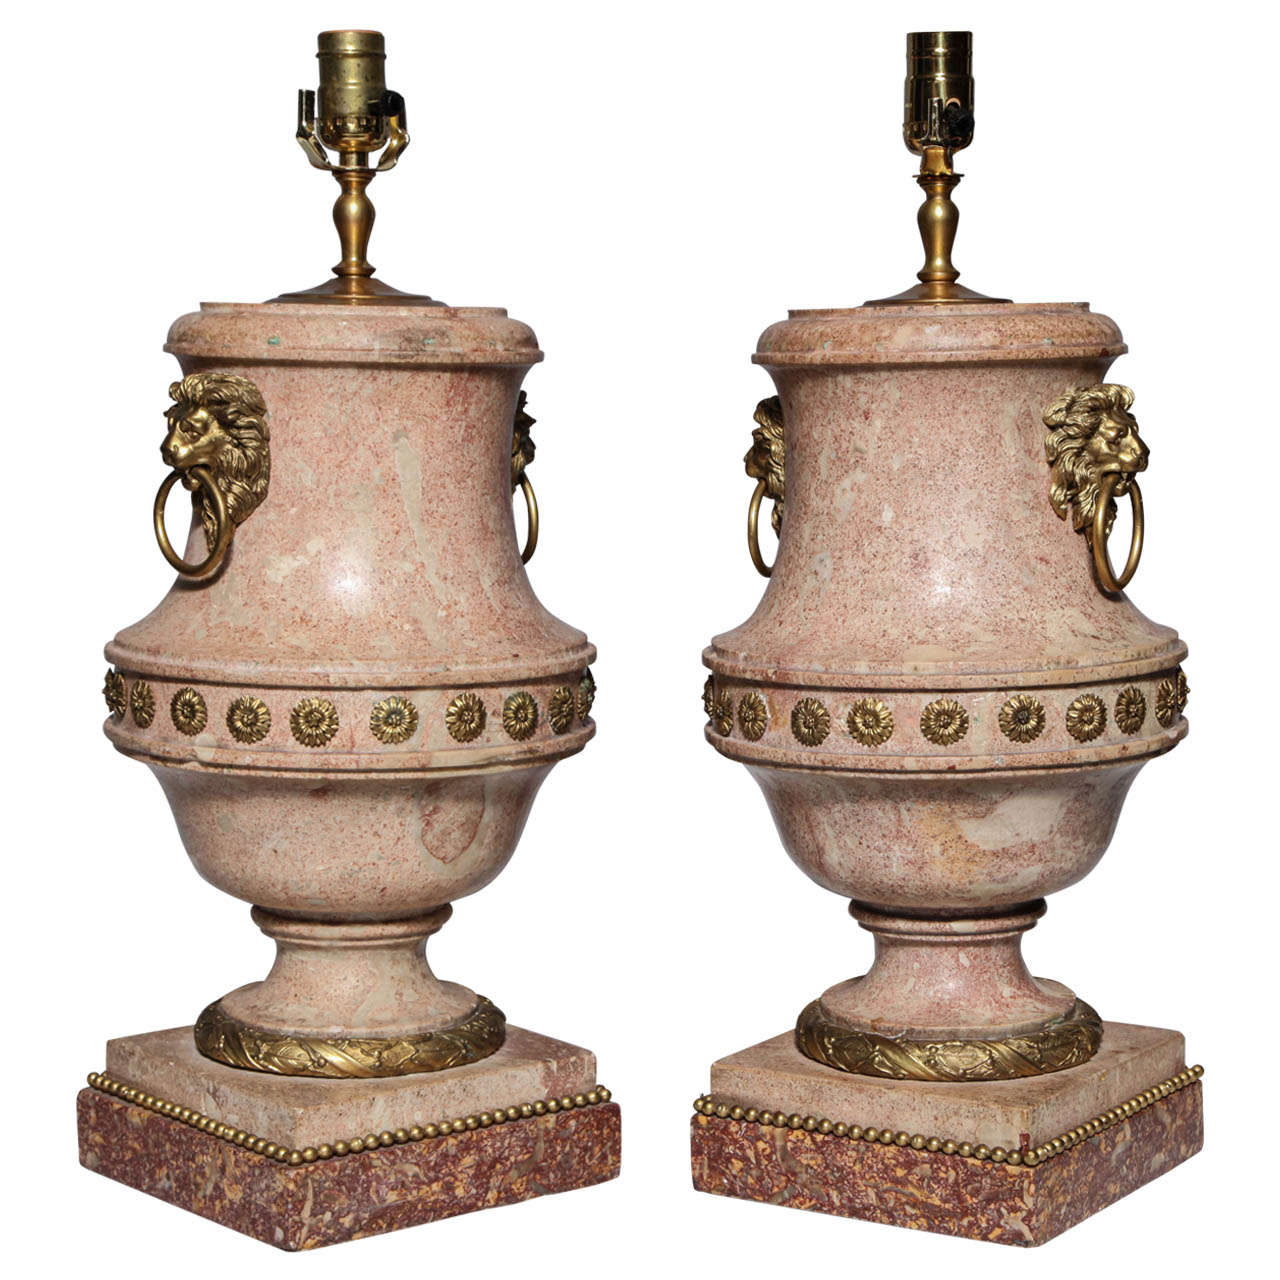 Pair of Fine Quality Italian Scagliola Urns with Ormolu Mounts as Lamps For Sale